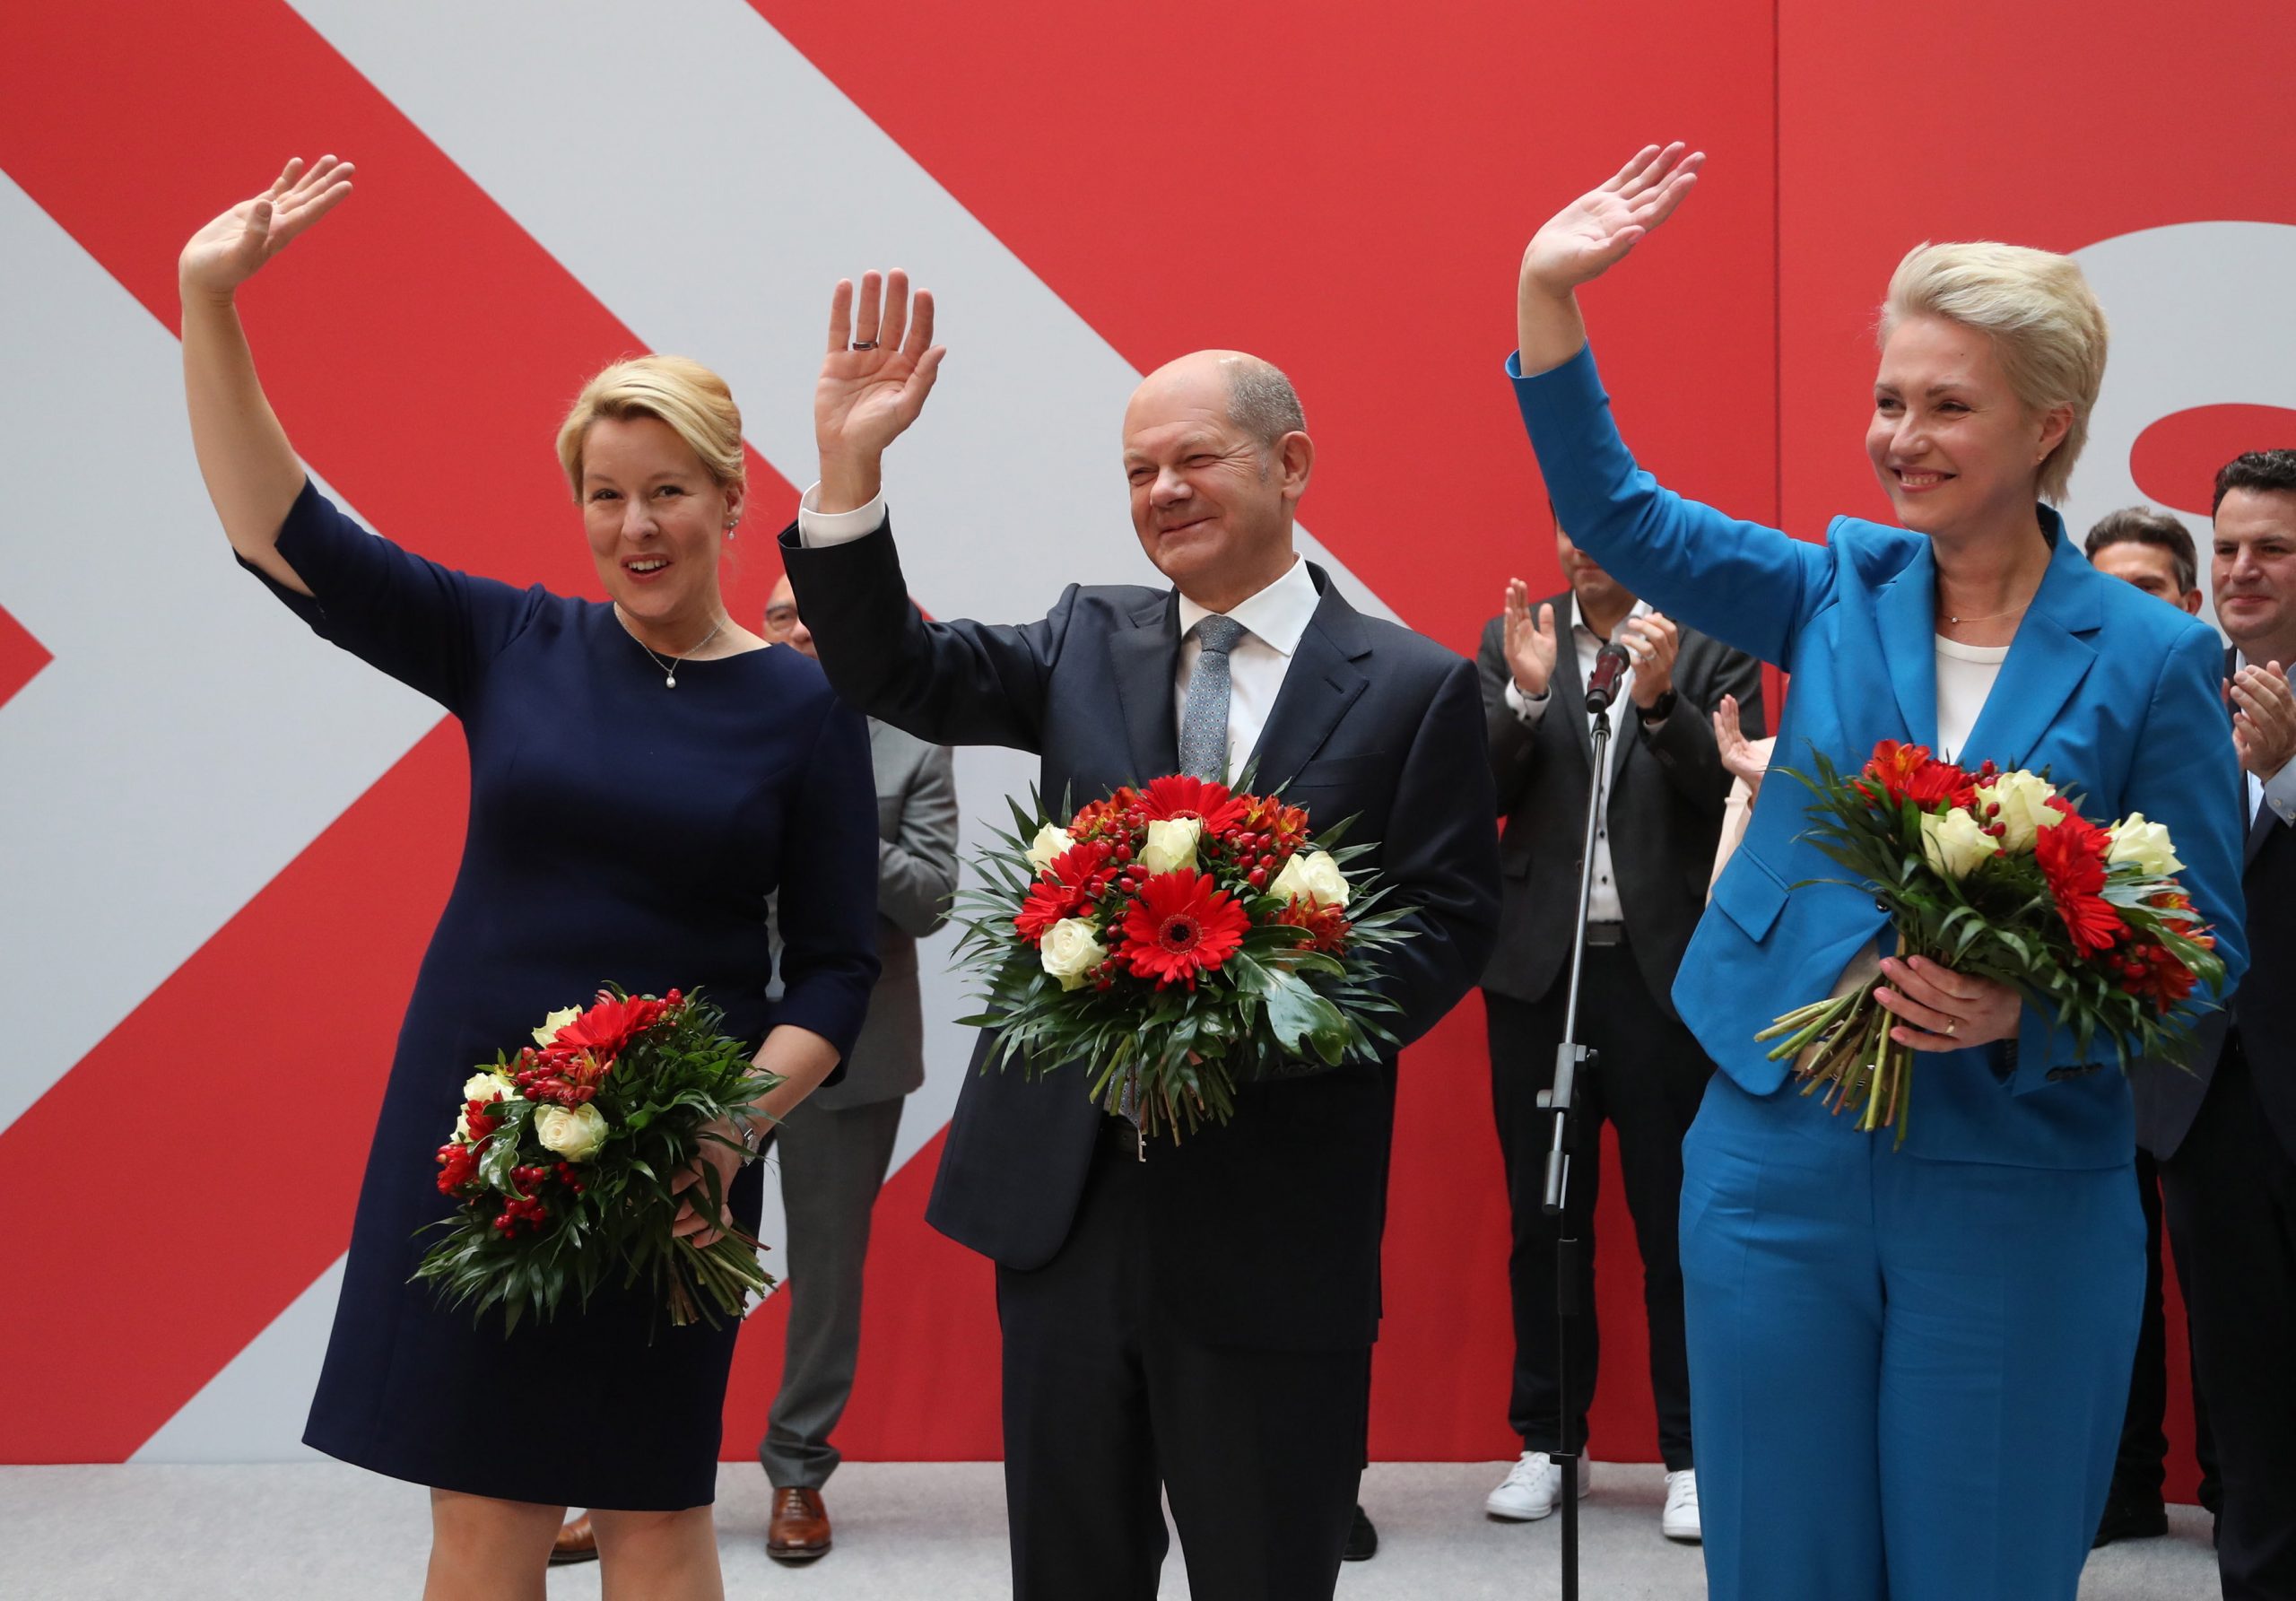 Press Roundup: First Reactions to the German Election